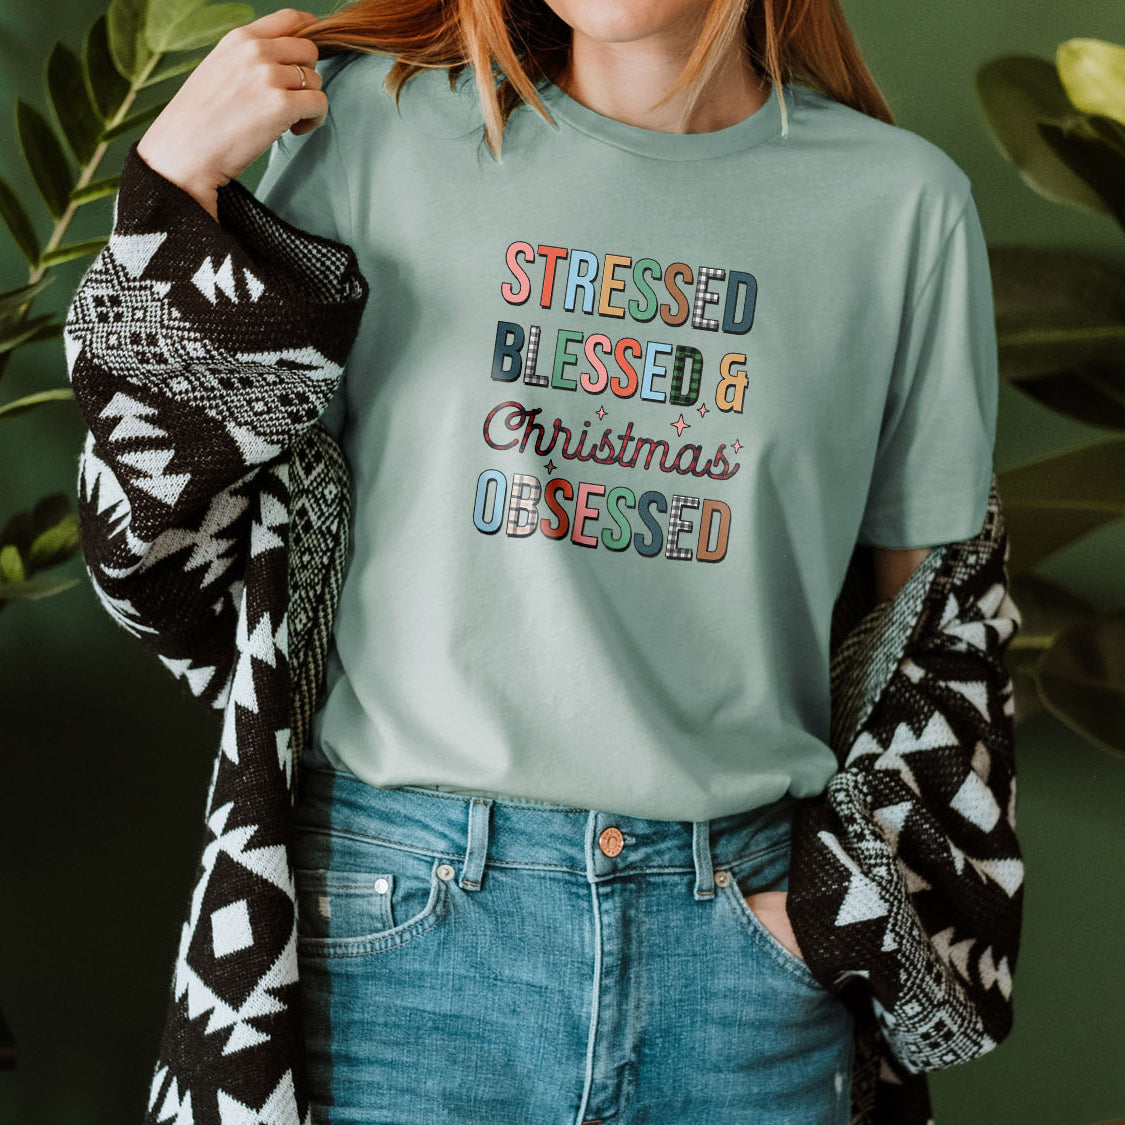 Stressed Blessed & Christmas Obsessed T-shirt - Christmas Winter Retro Vintage Design Printed Tee Shirt